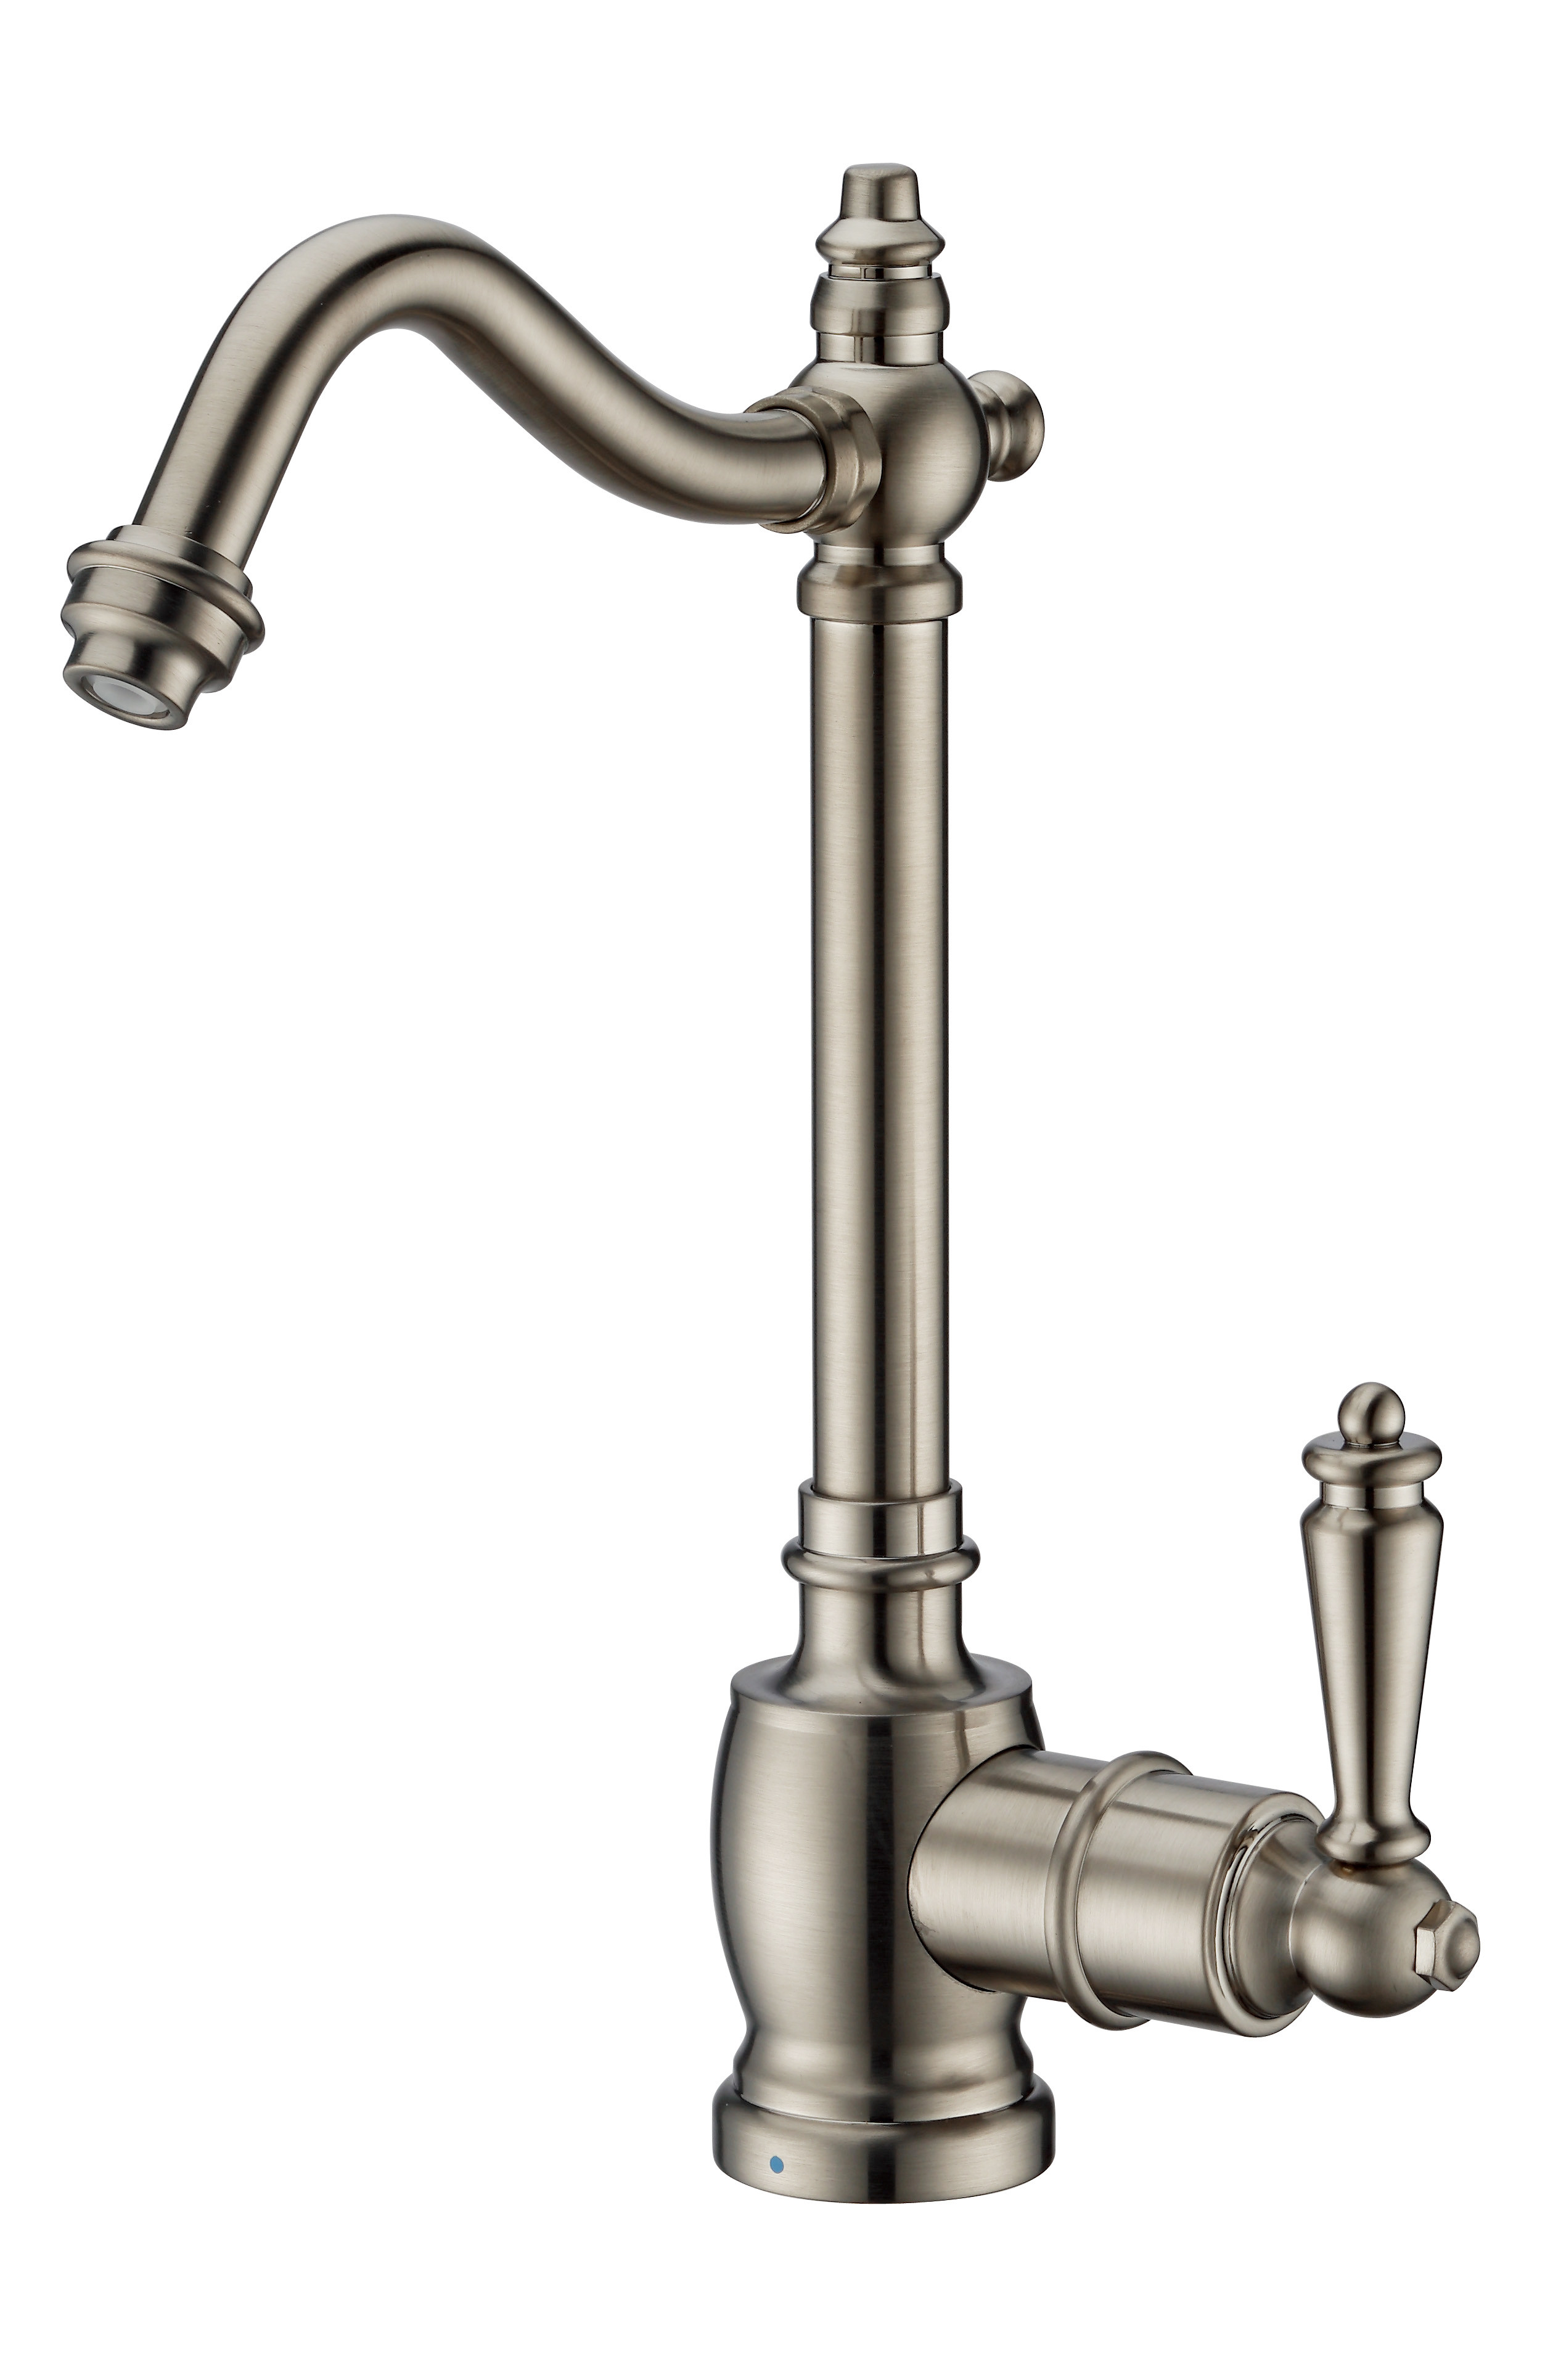 Whitehaus WHFH-C1006-BN Brushed Nickel Point of Use Cold Water Faucet with Traditional Spout